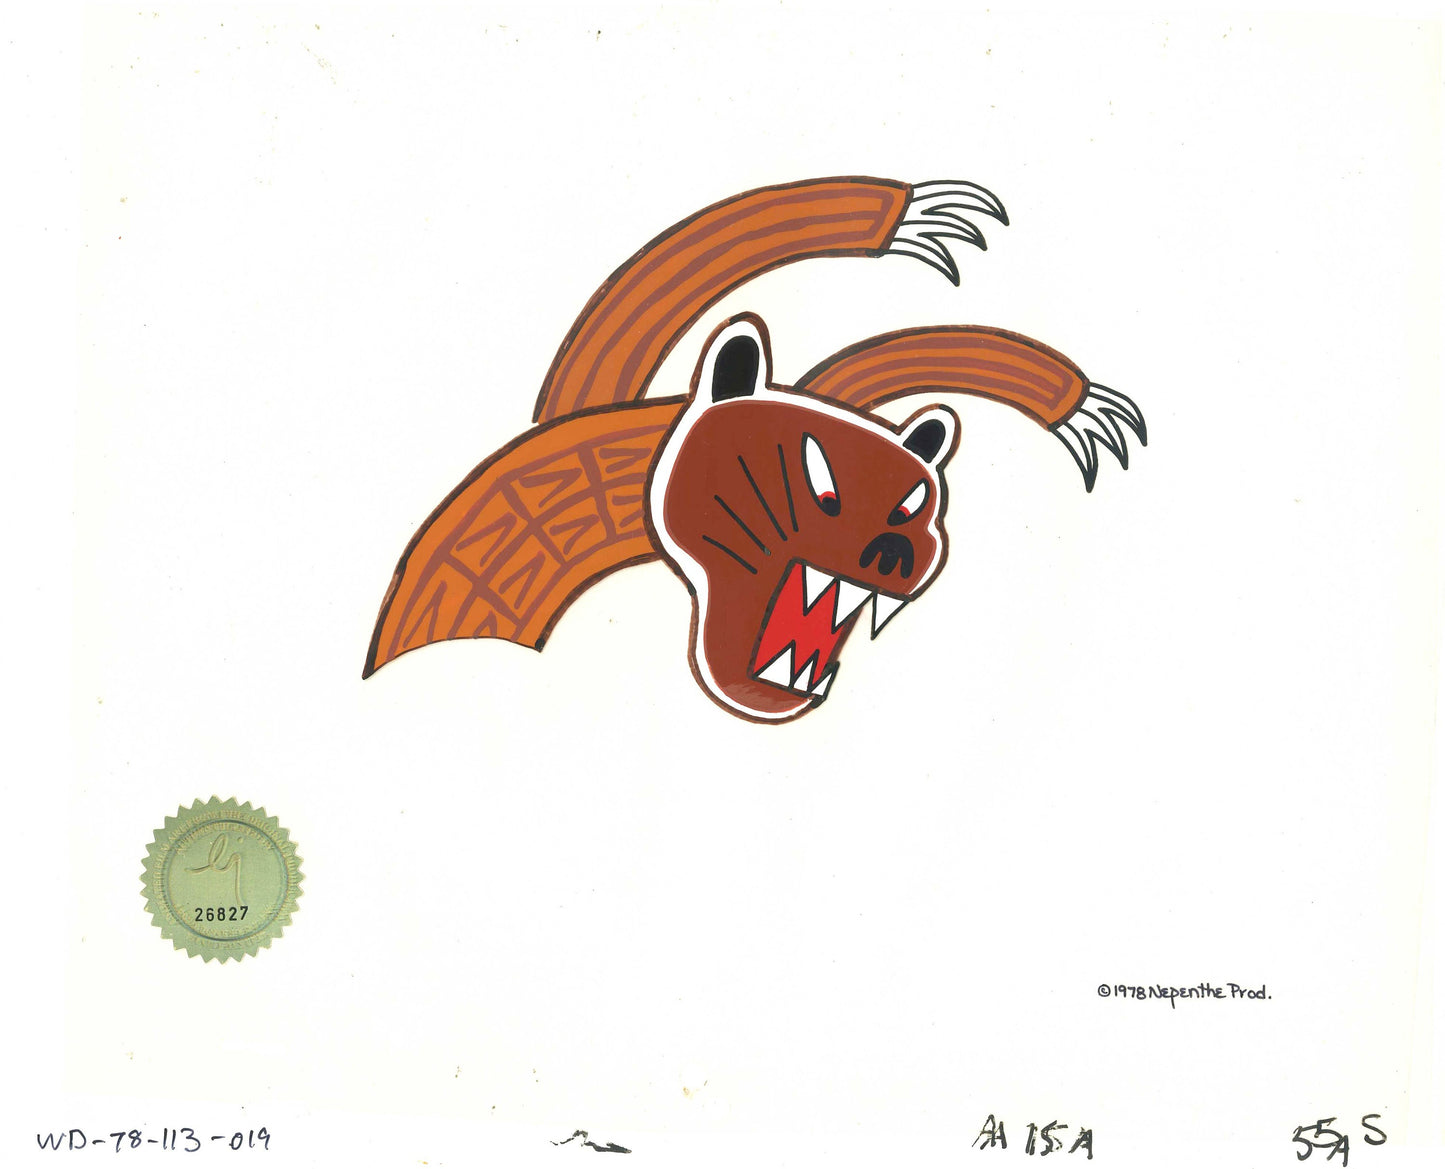 Watership Down Opening Fable El-ahrairah 1978 Production Animation Cel with LJE Seal and COA 113-019 of an Animal